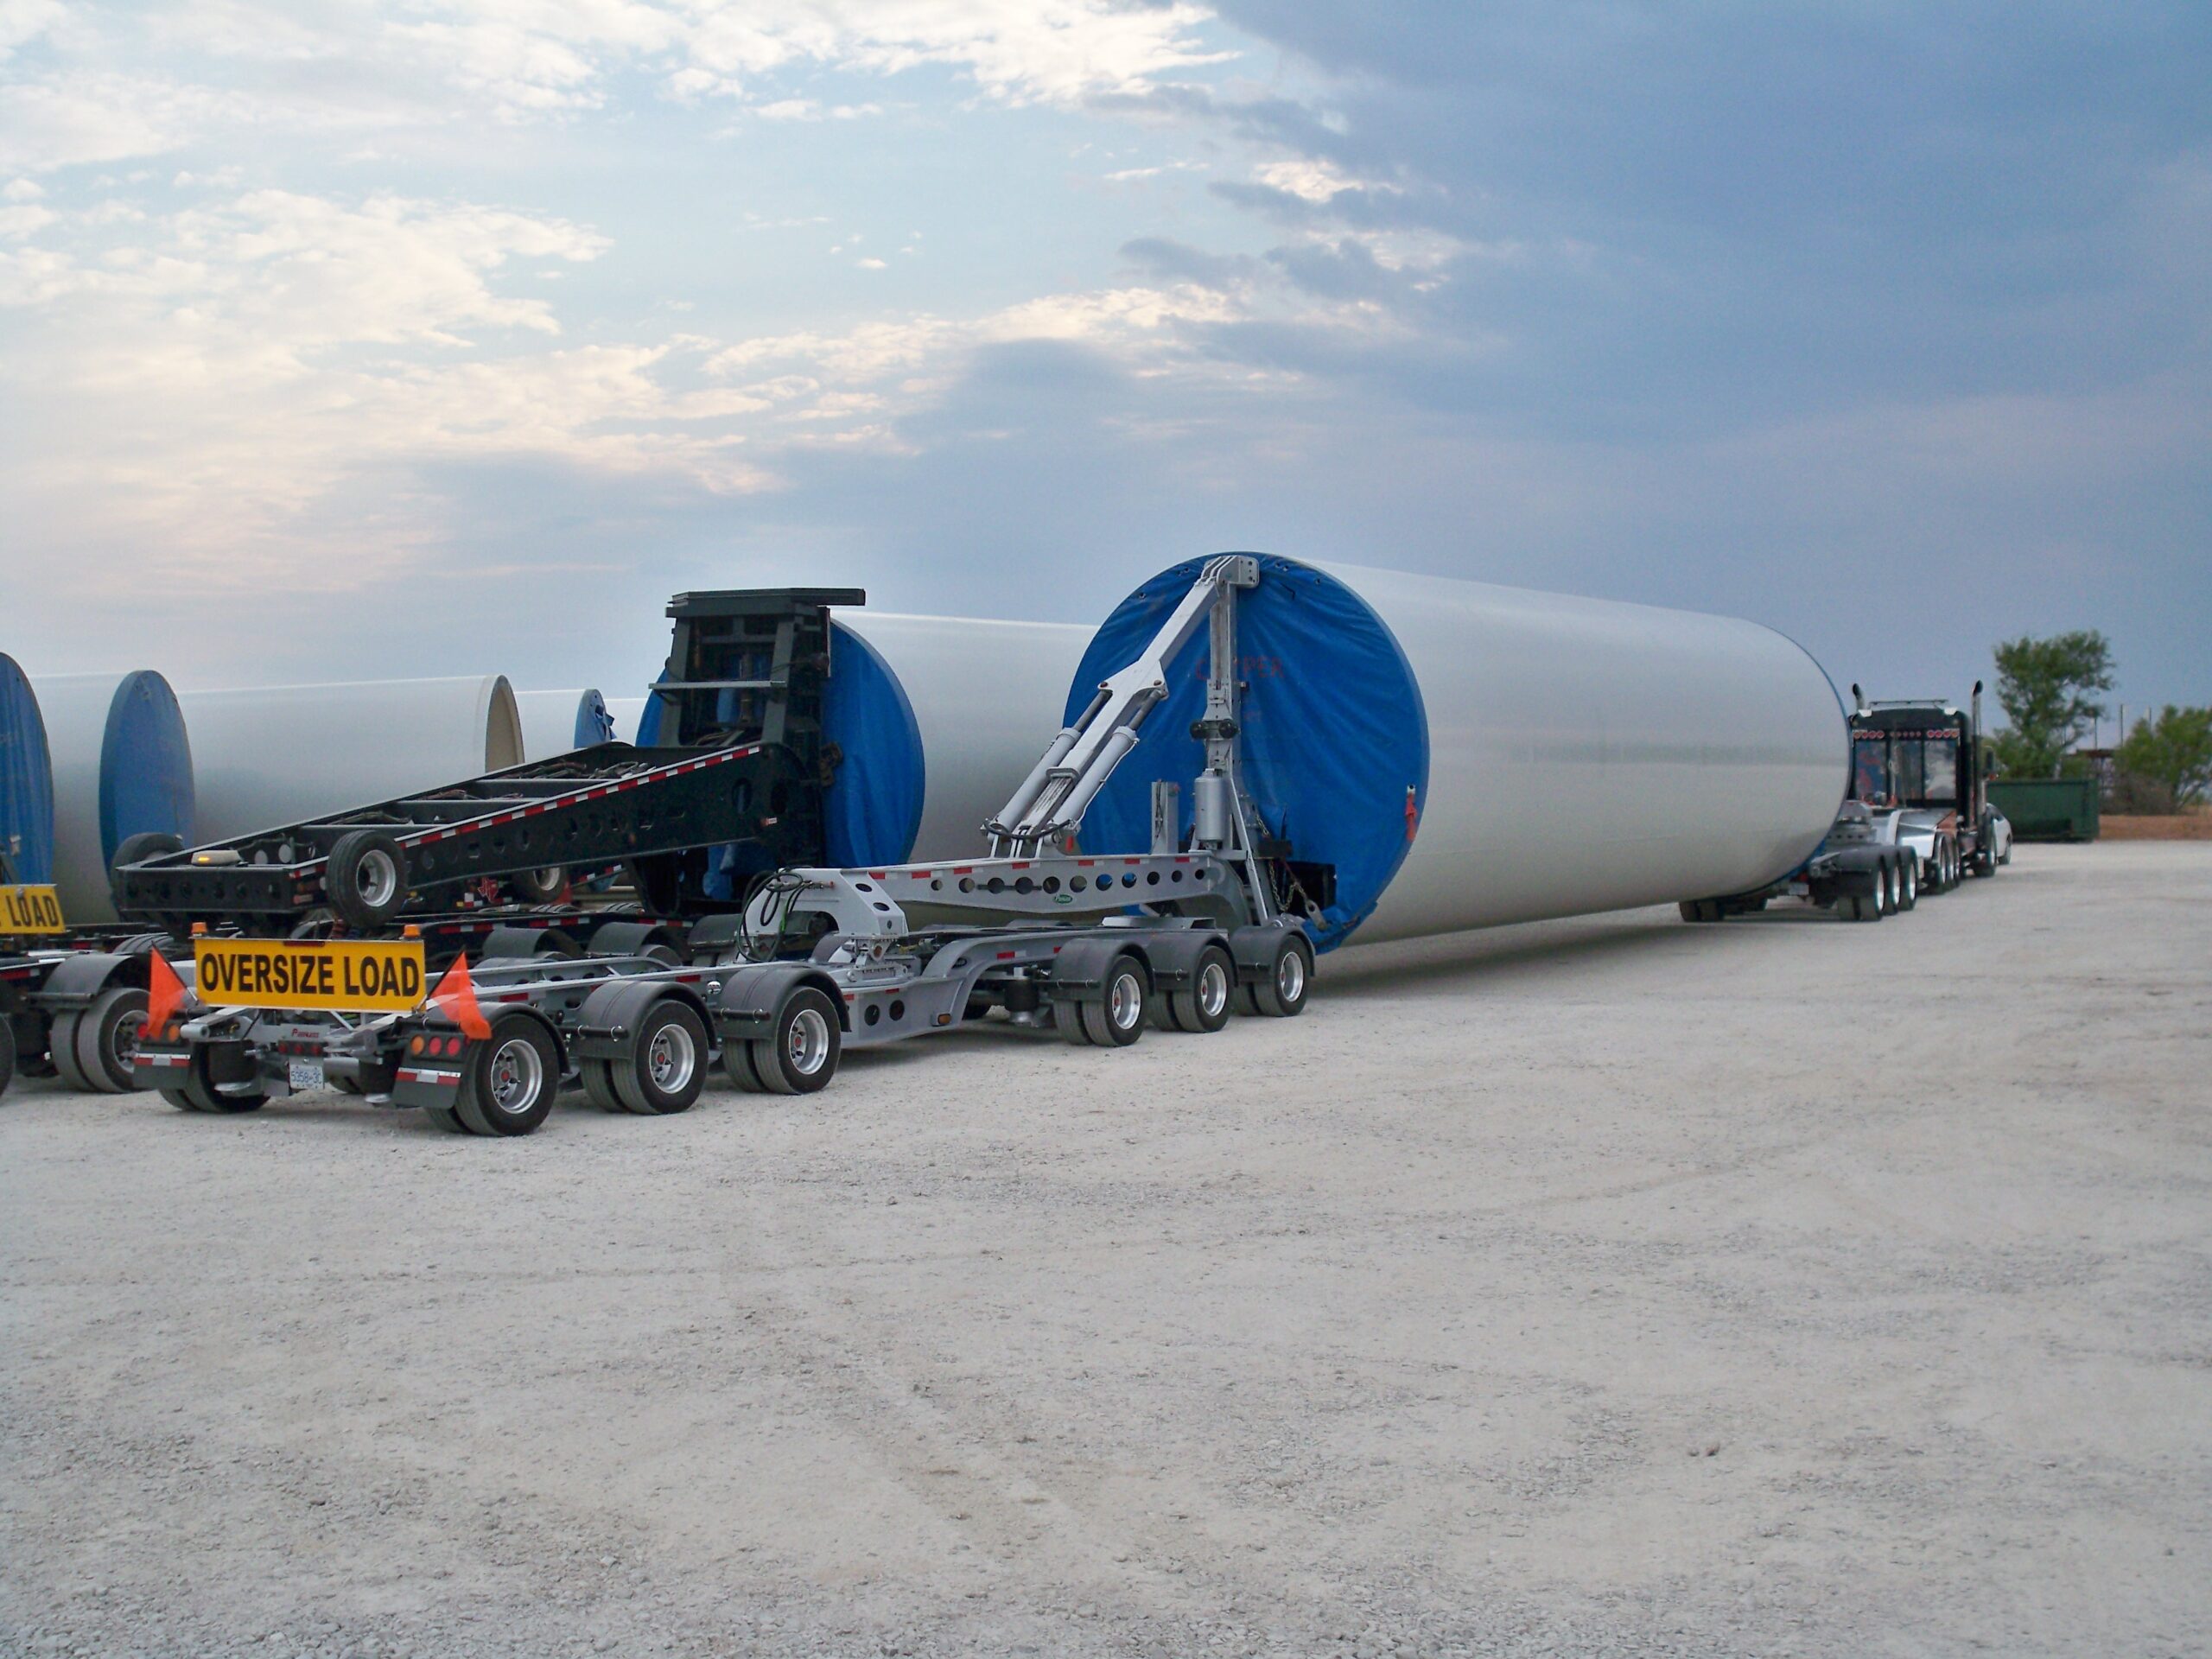 Dual schnabel component trailers loaded with wind tower sections